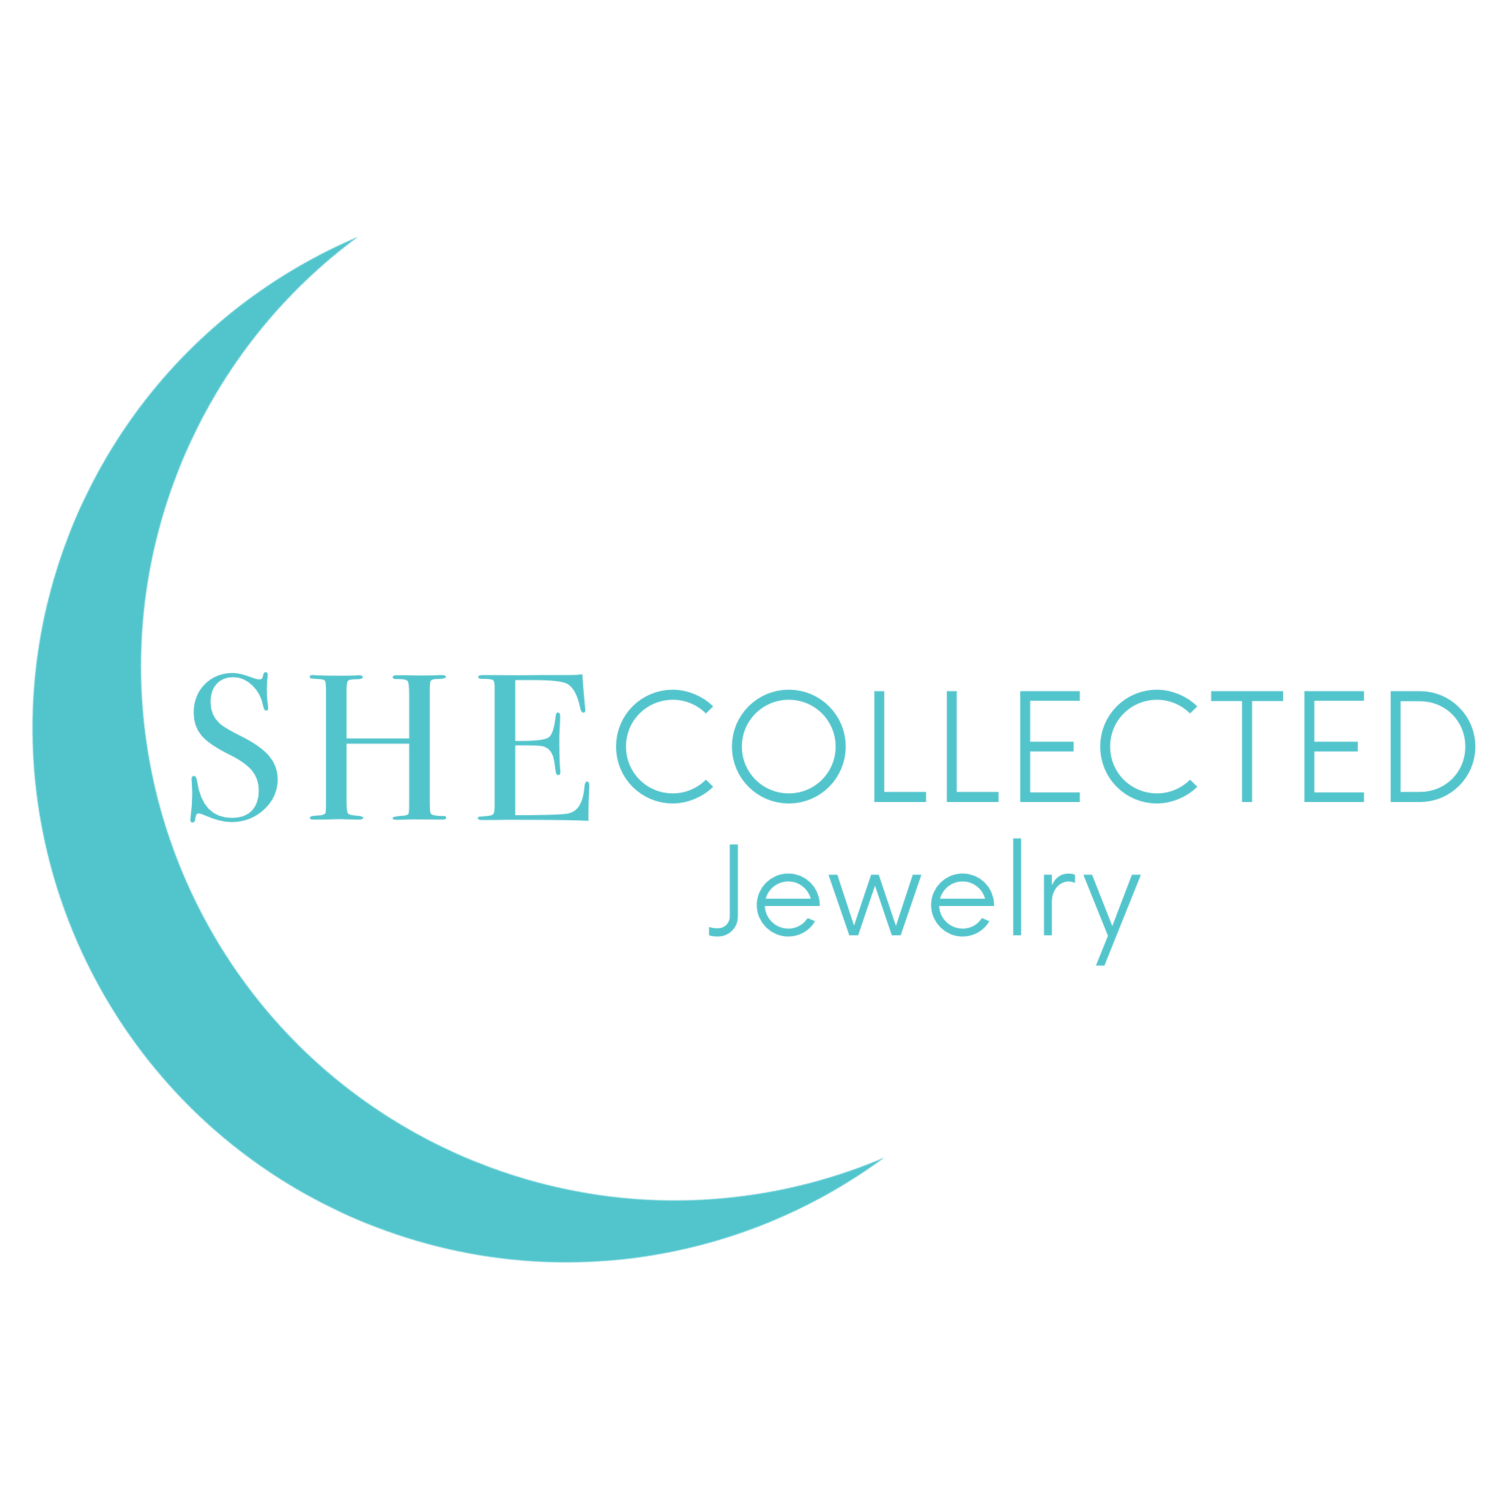 Shecollected Jewelry